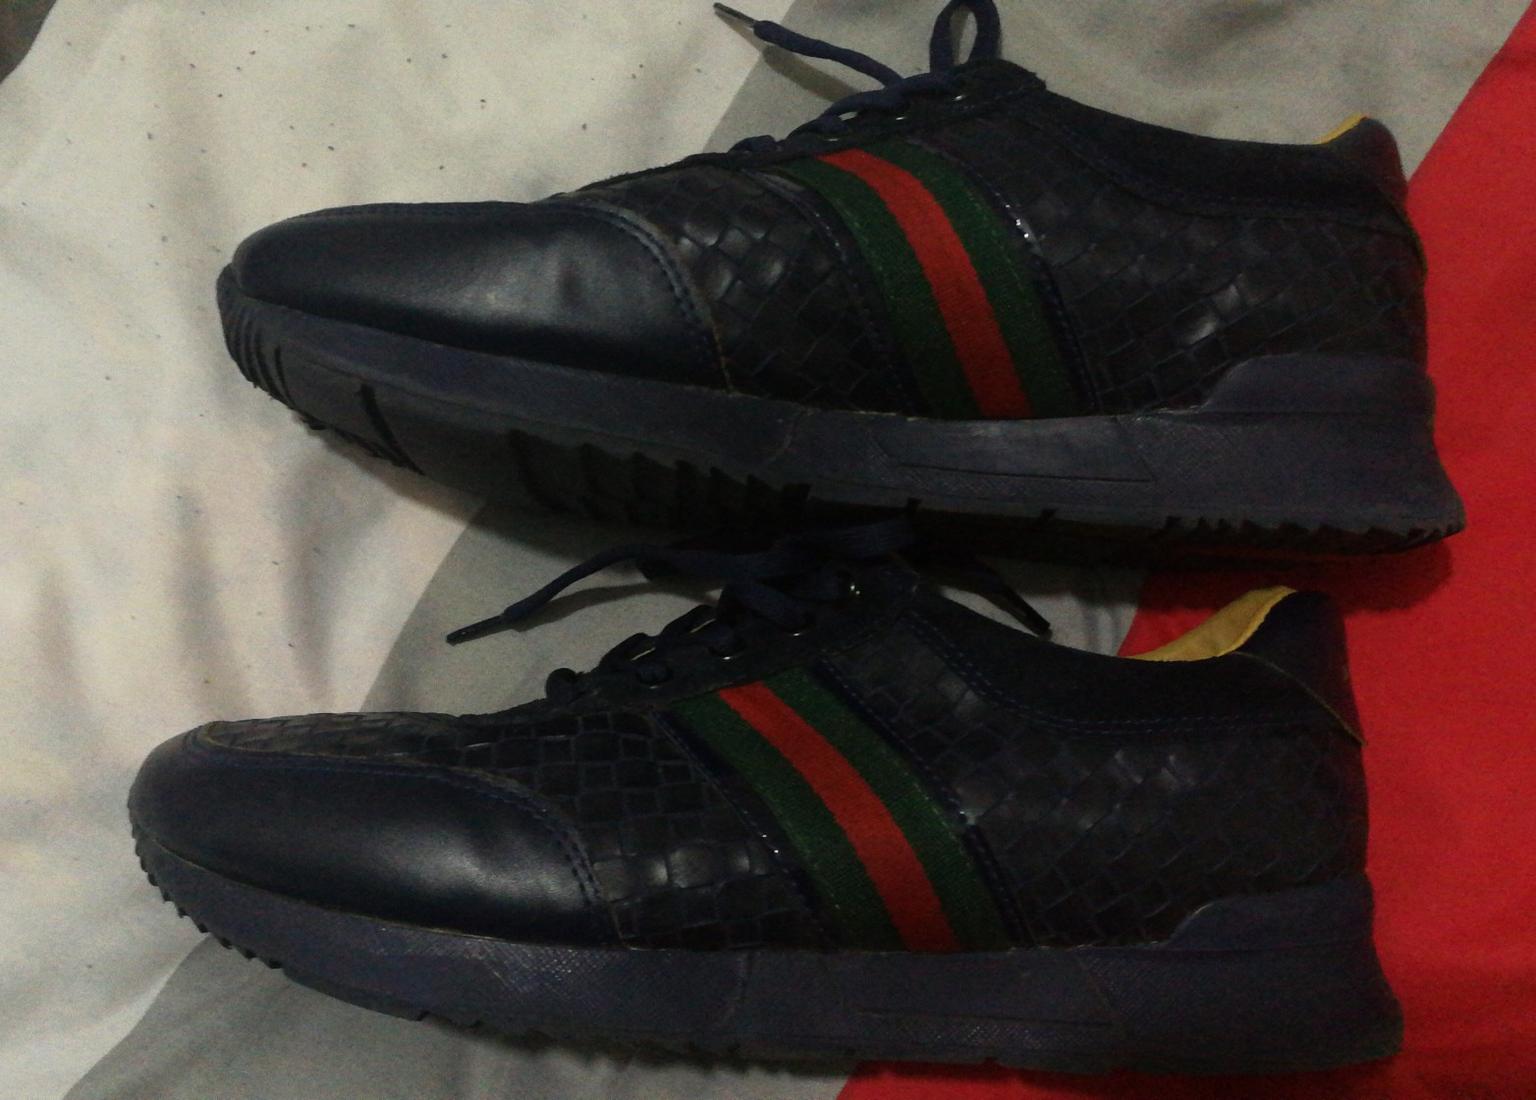 second hand gucci shoes mens